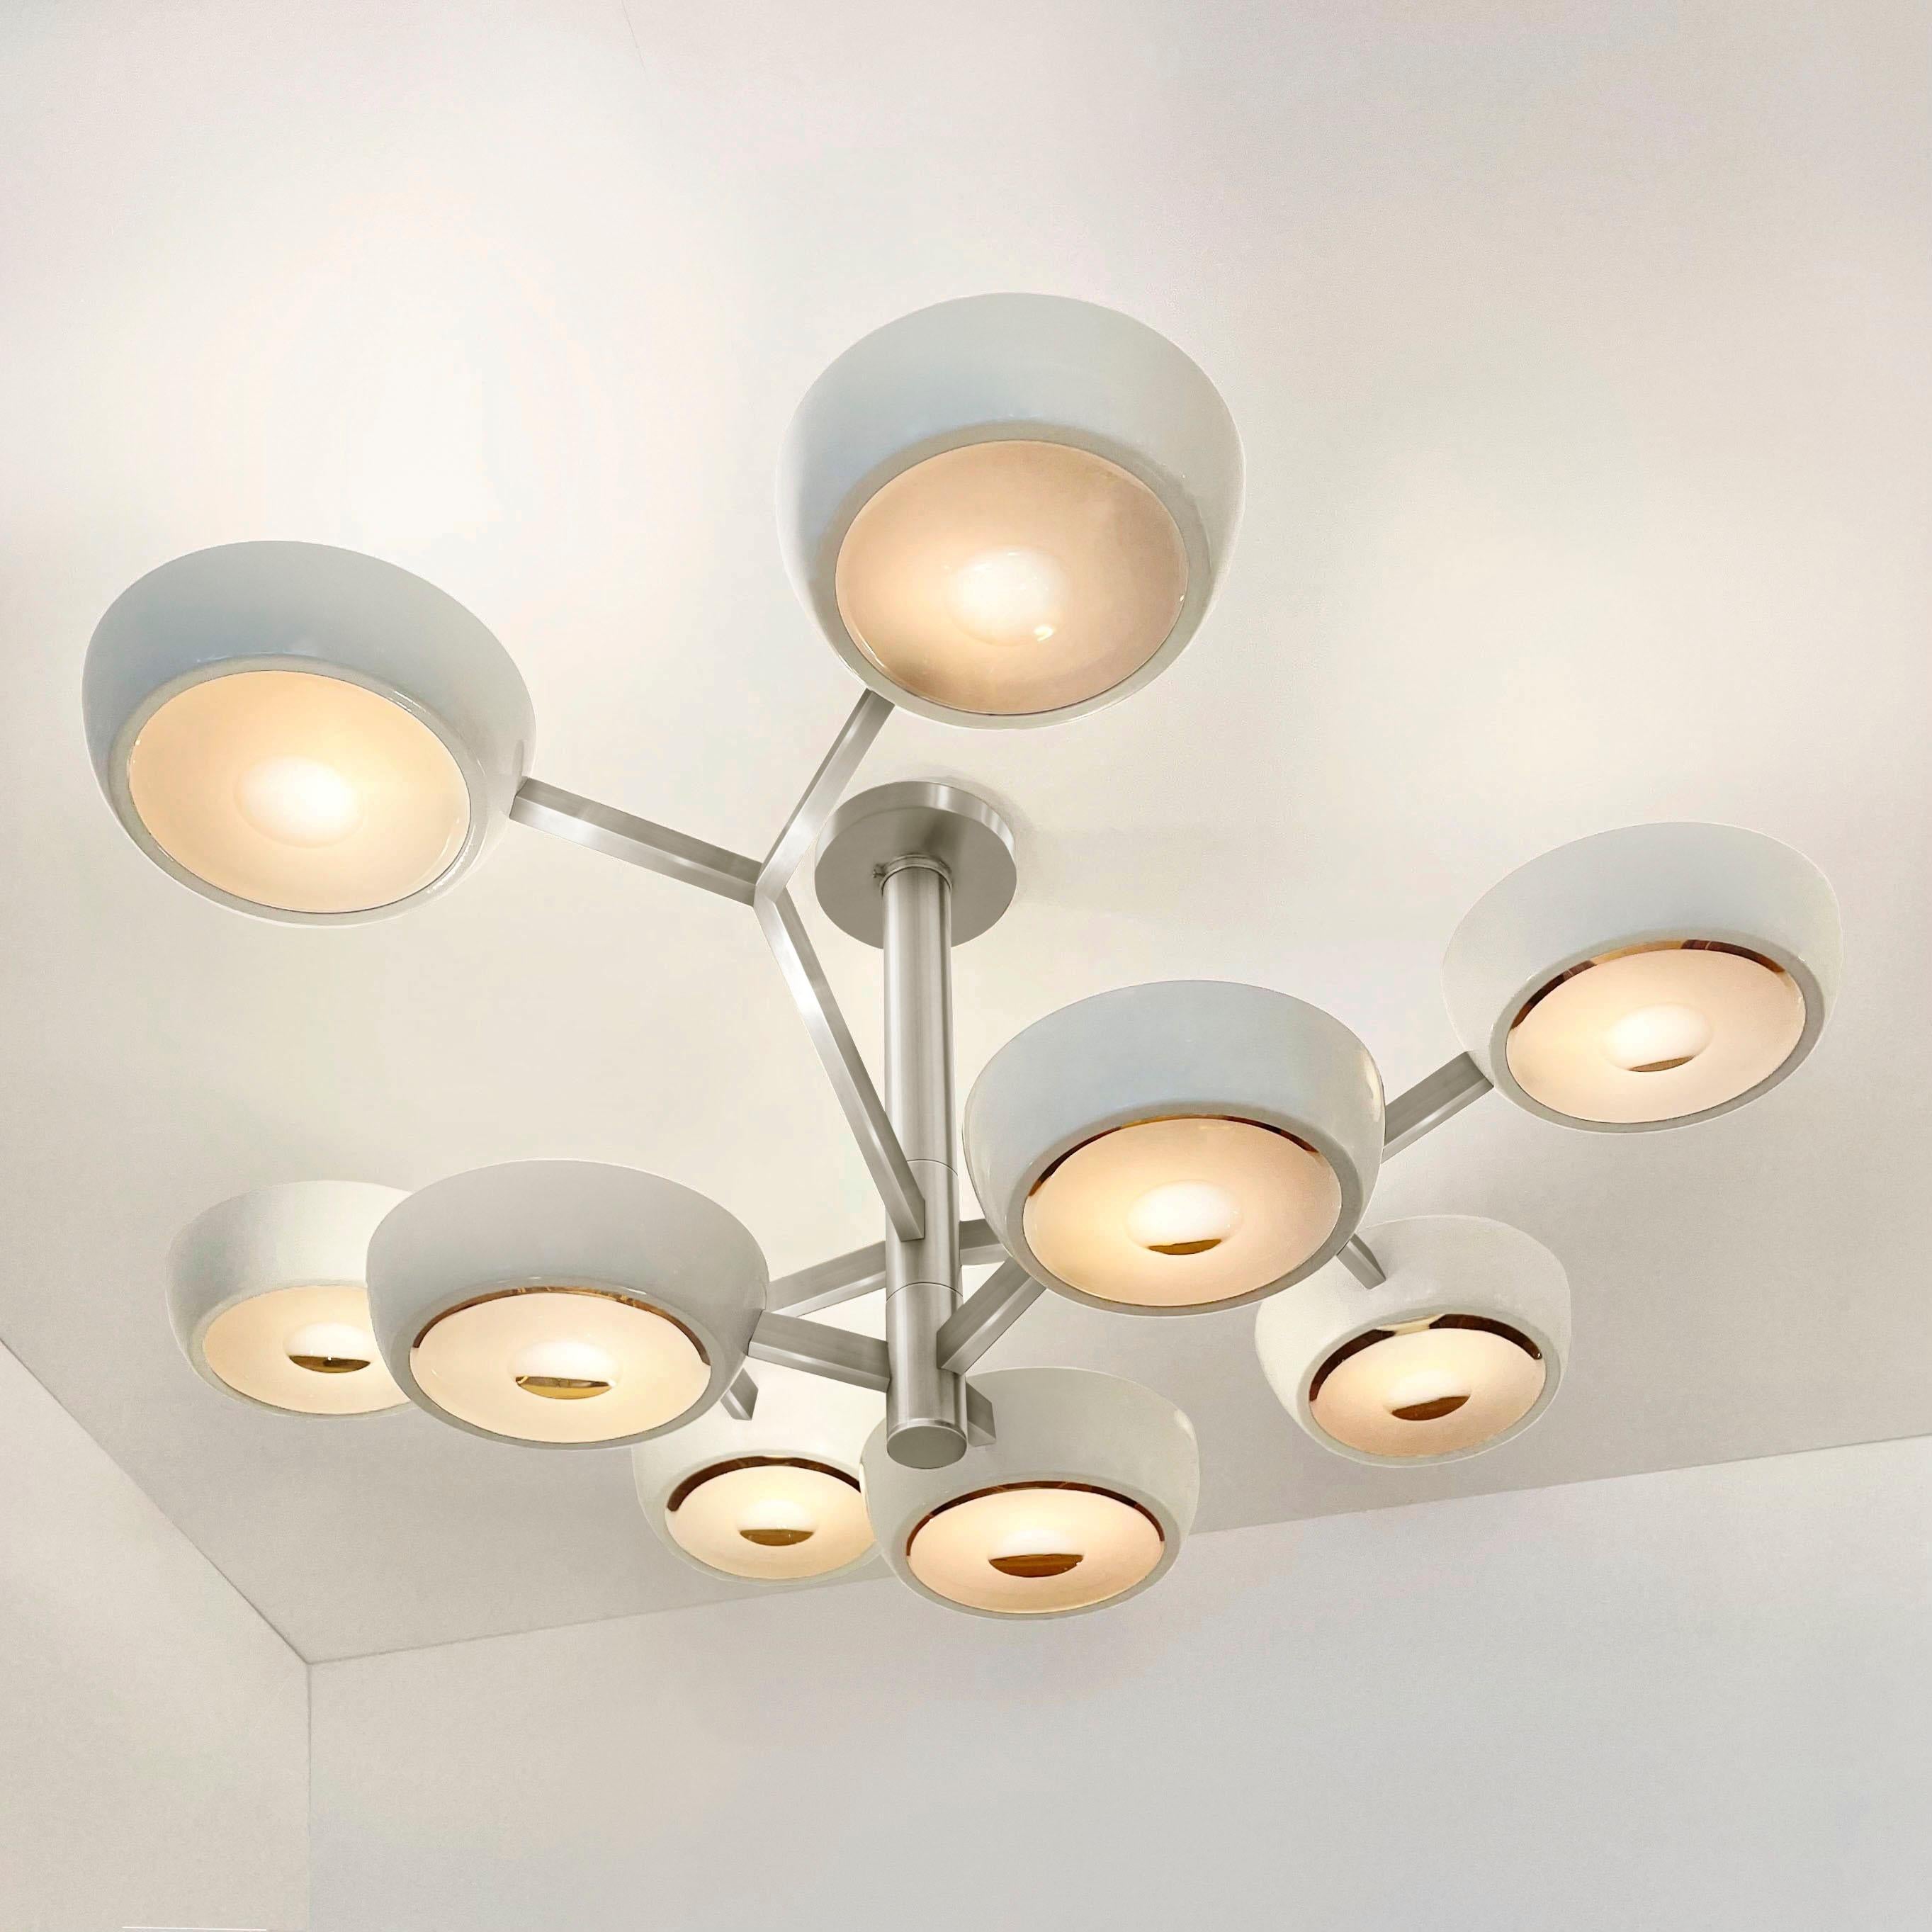 Modern Rose Ceiling Light by Gaspare Asaro-Satin Nickel Finish For Sale